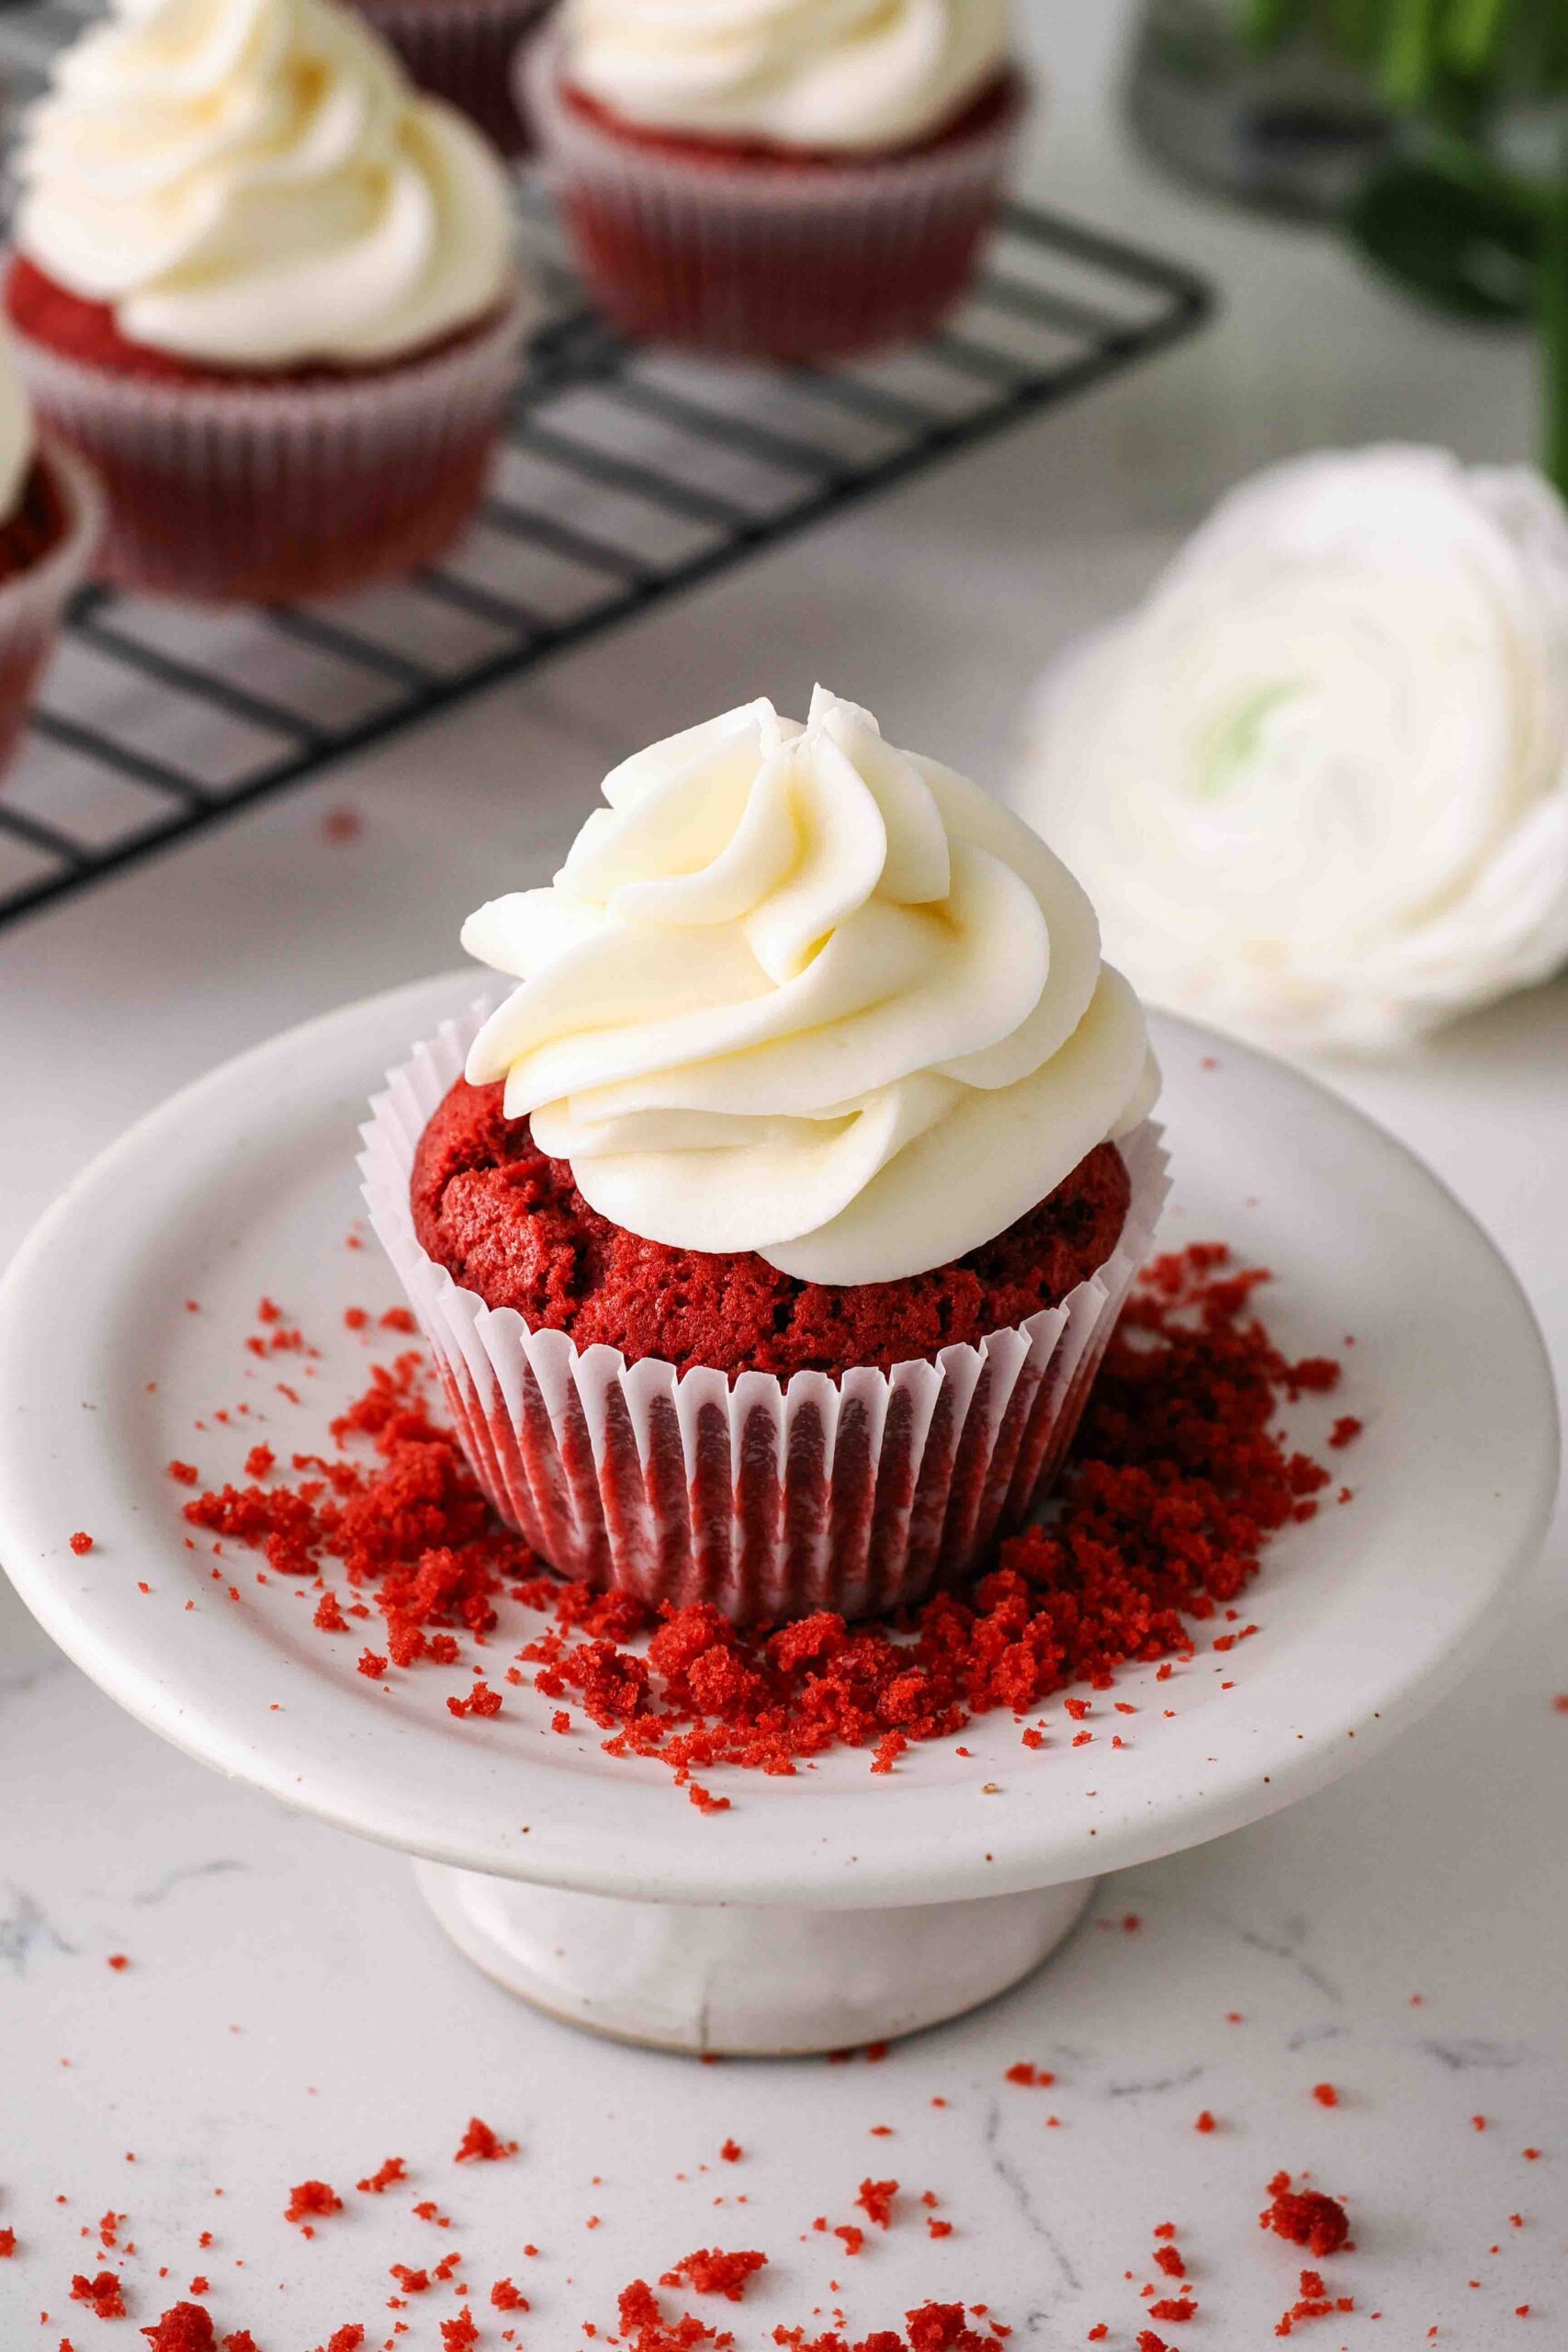 A red velvet cupcake with cream cheese frosting on a cupcake stand with red velvet crumbs.